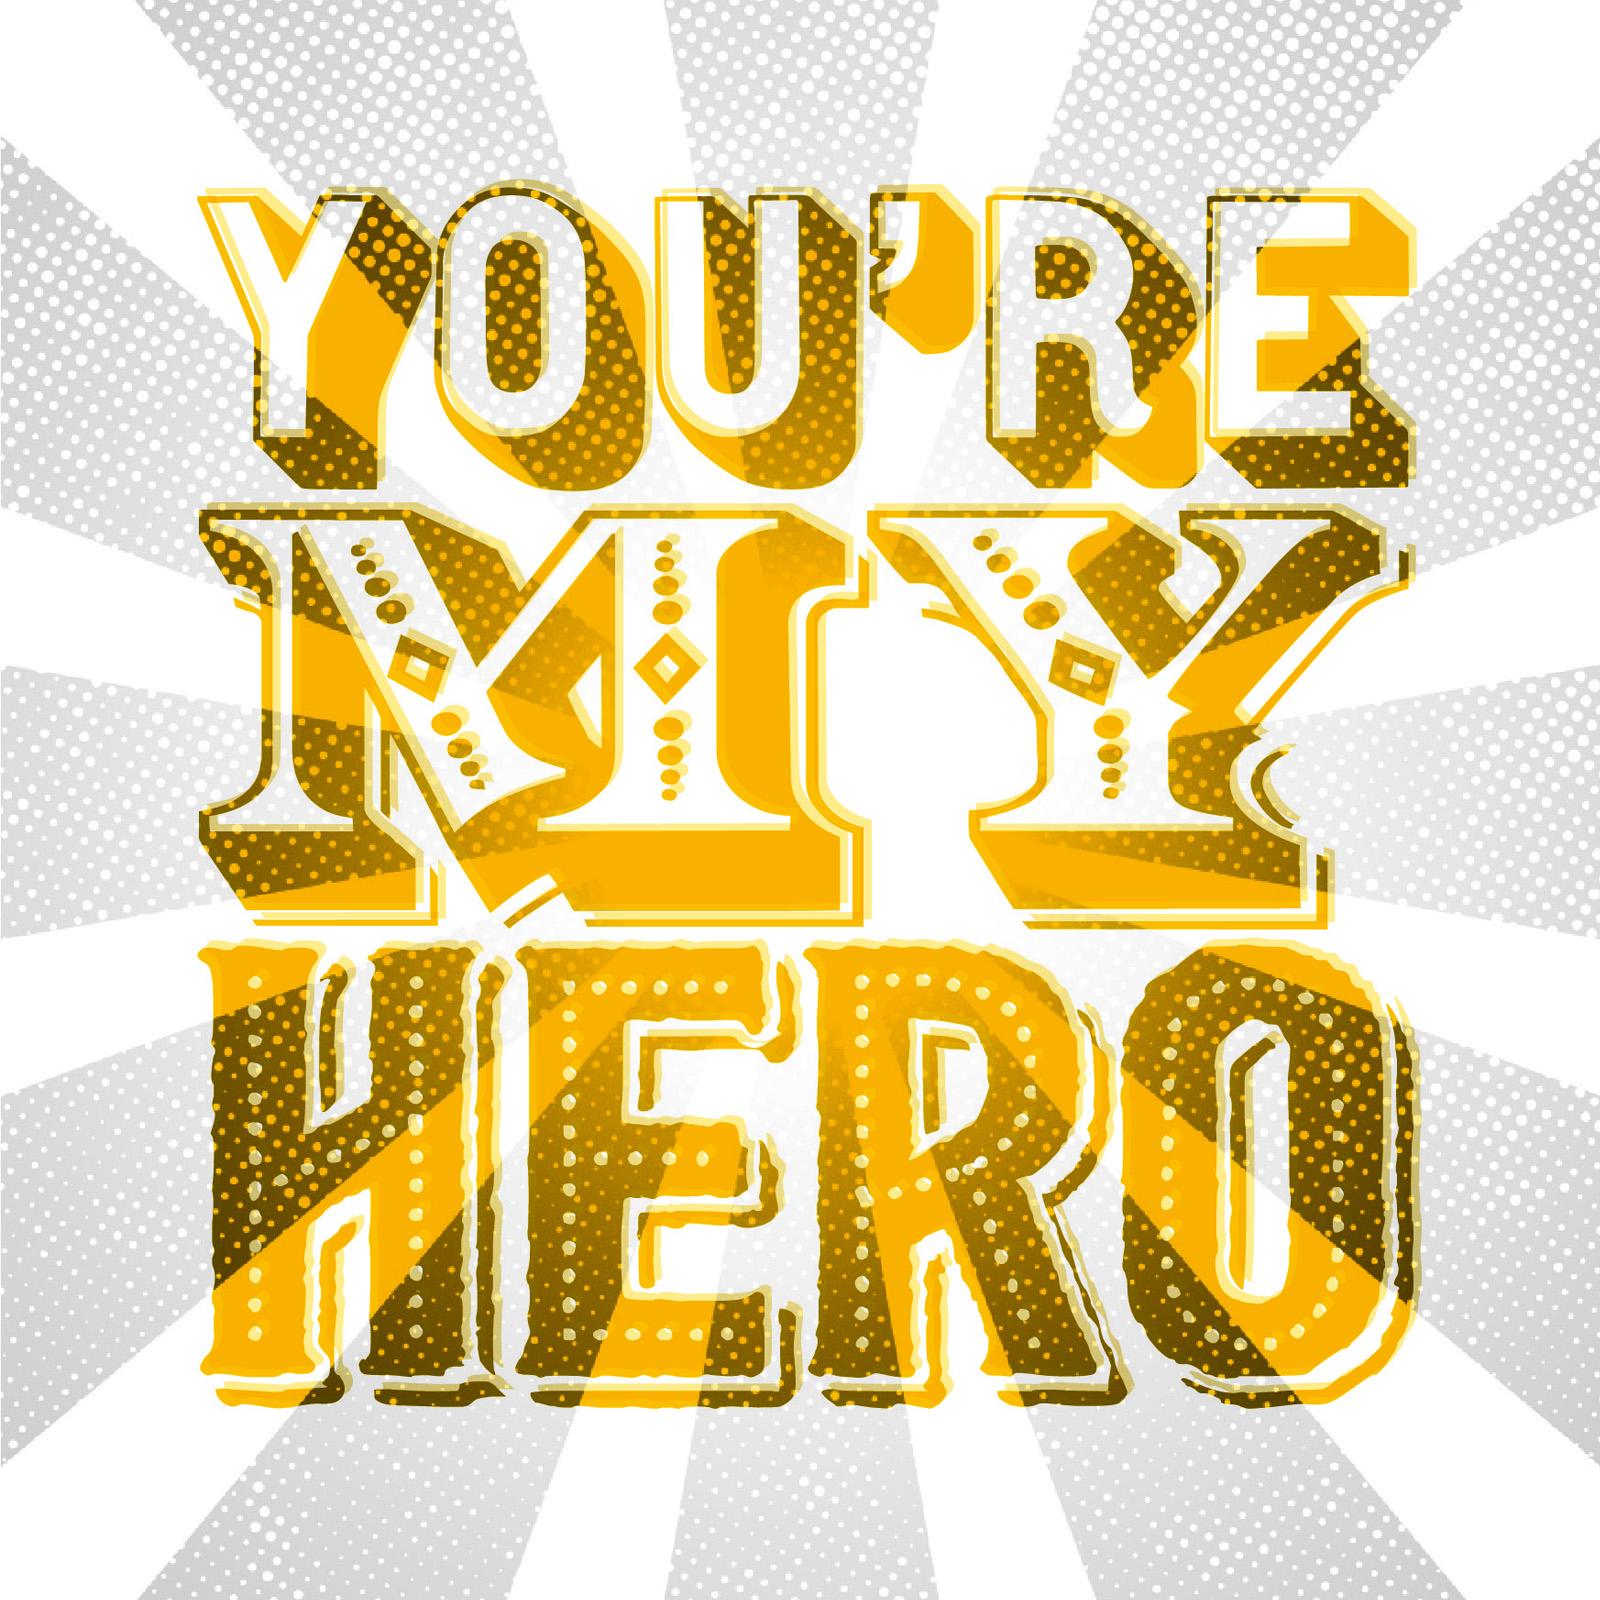 circus-style mix and match typography that reads you're my hero in yellow with a grey-coloured distressed starburst background